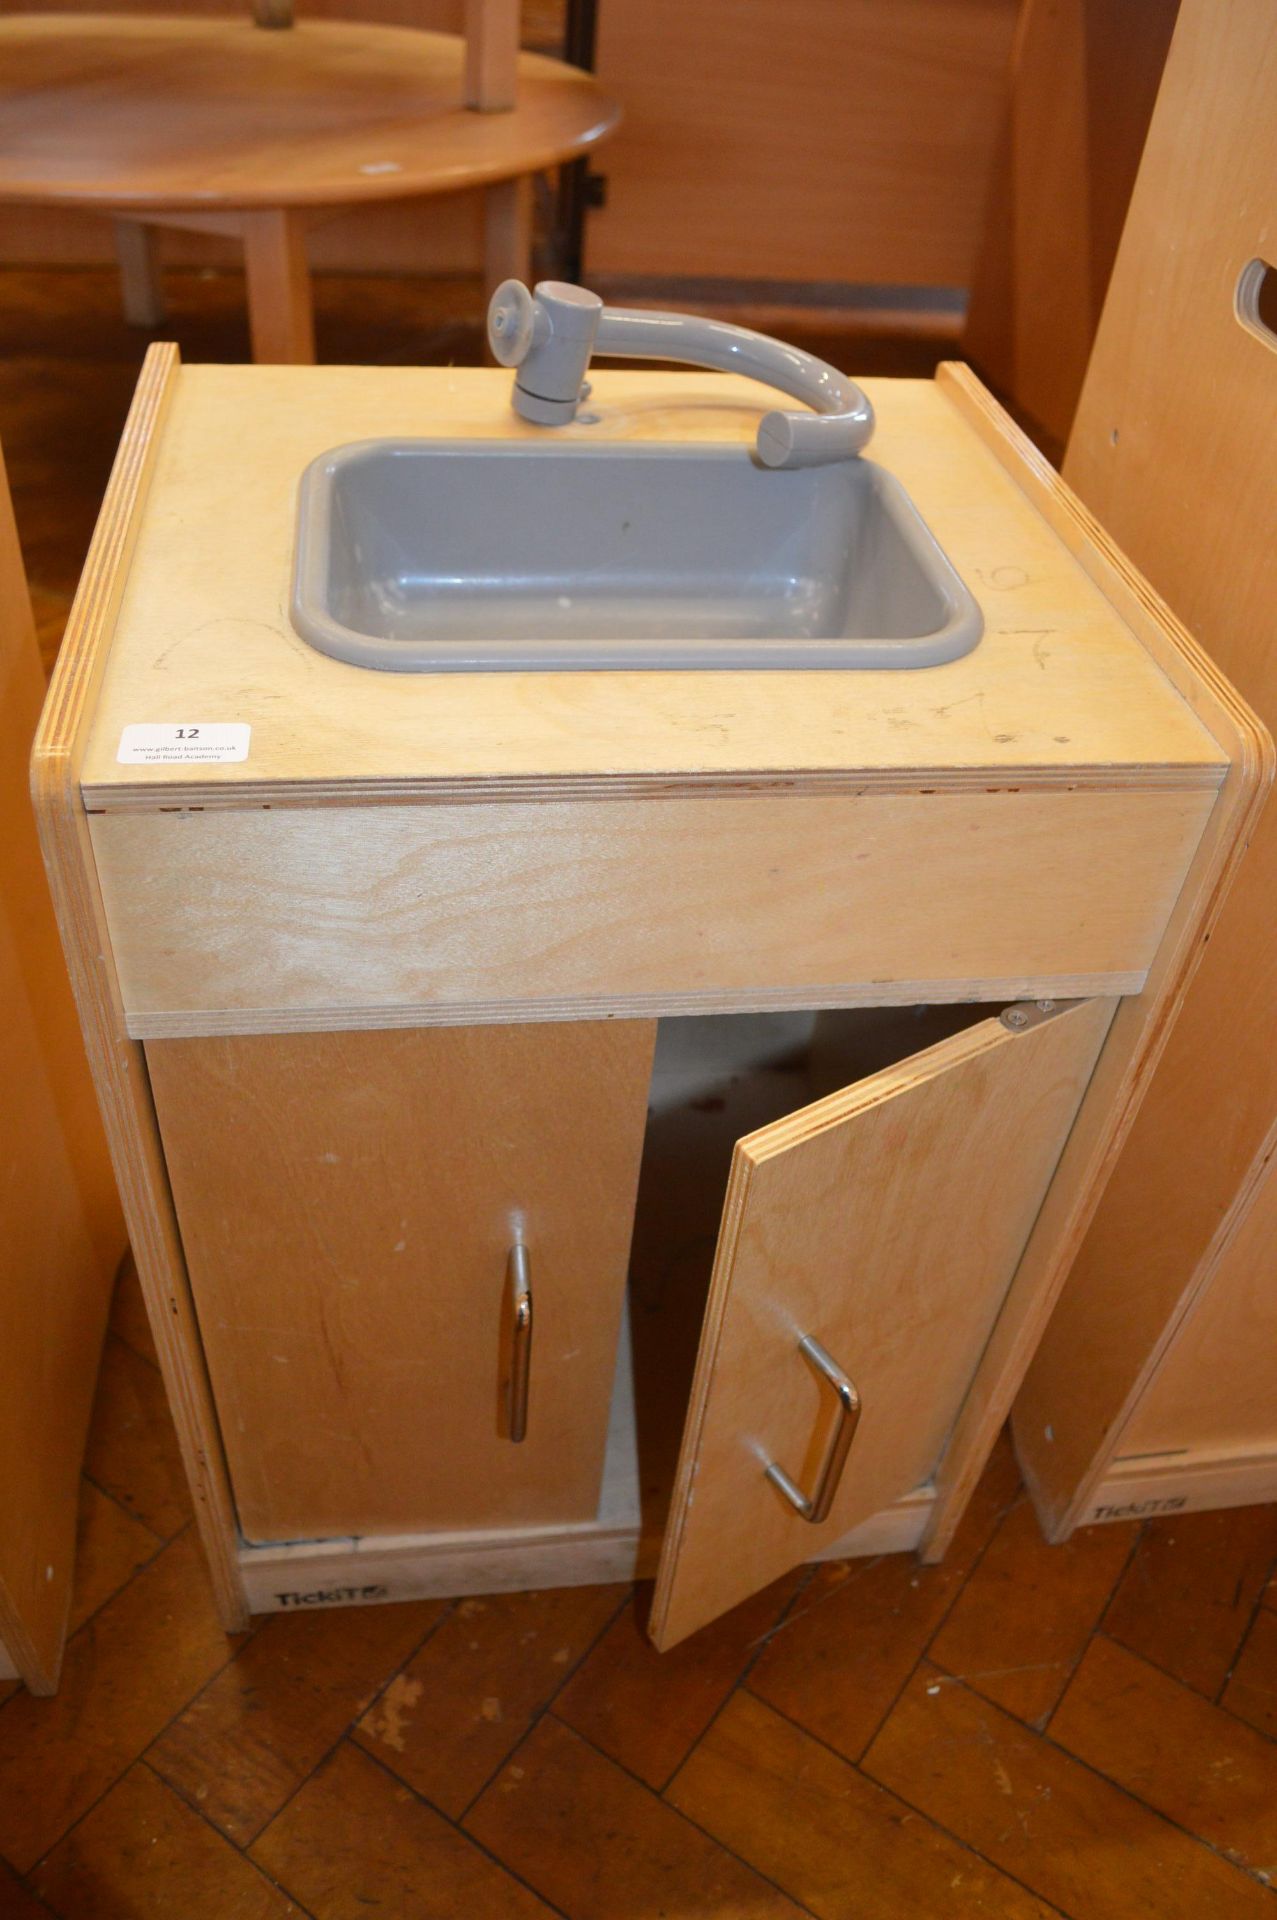 *Toy Sink Unit 15”x14” 21” tall (Lots 1001 - 1093 are based at Hall Road Academy, collection by